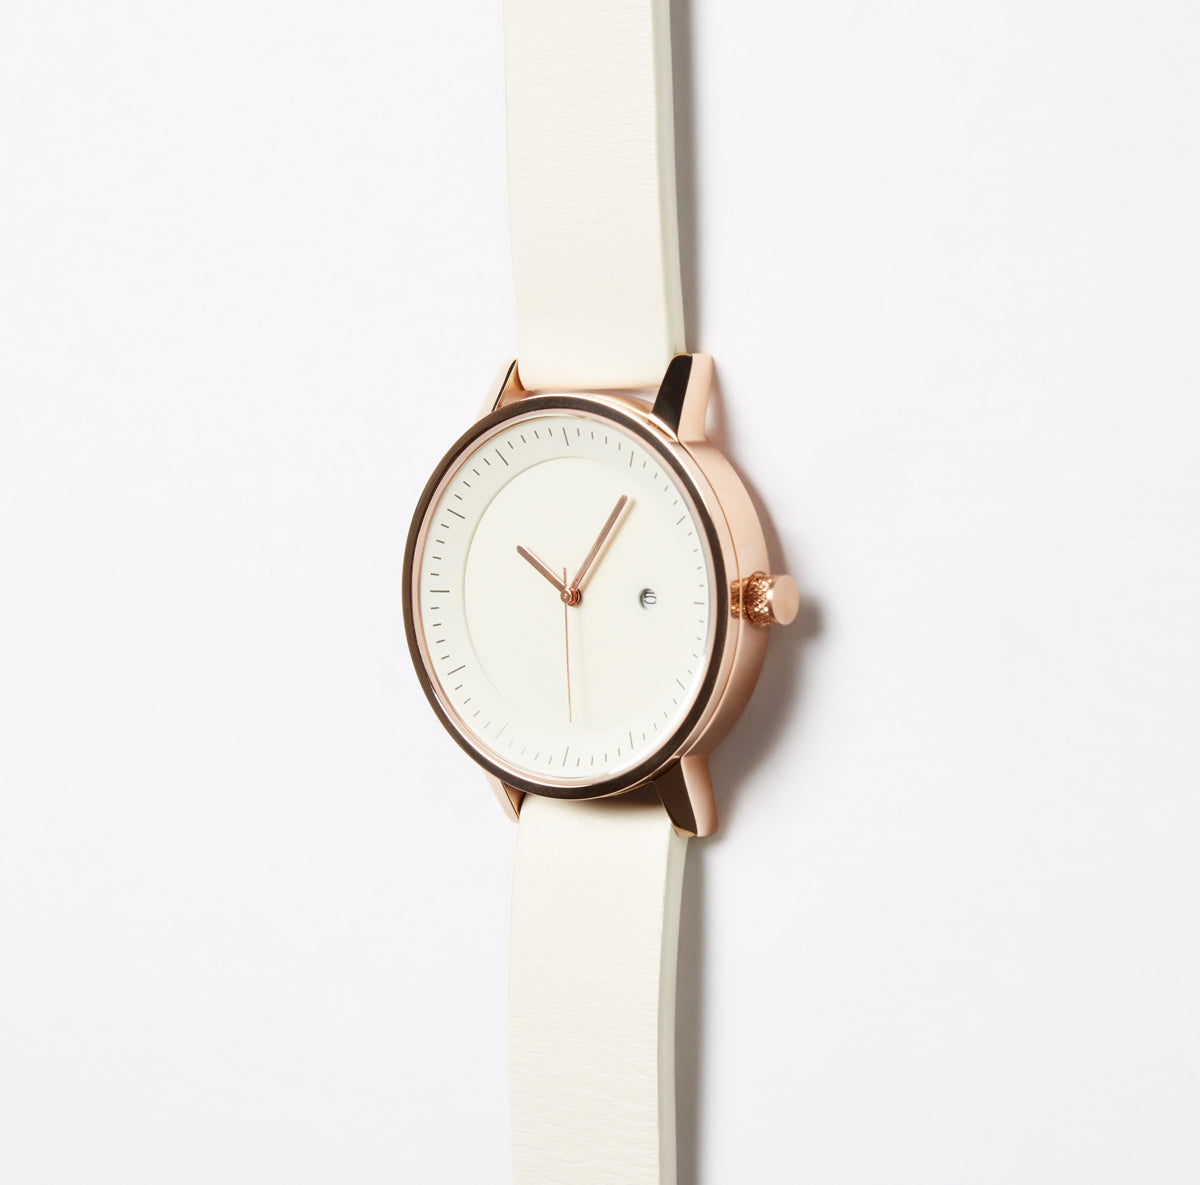 Earl Watch - White Gold - 42mm